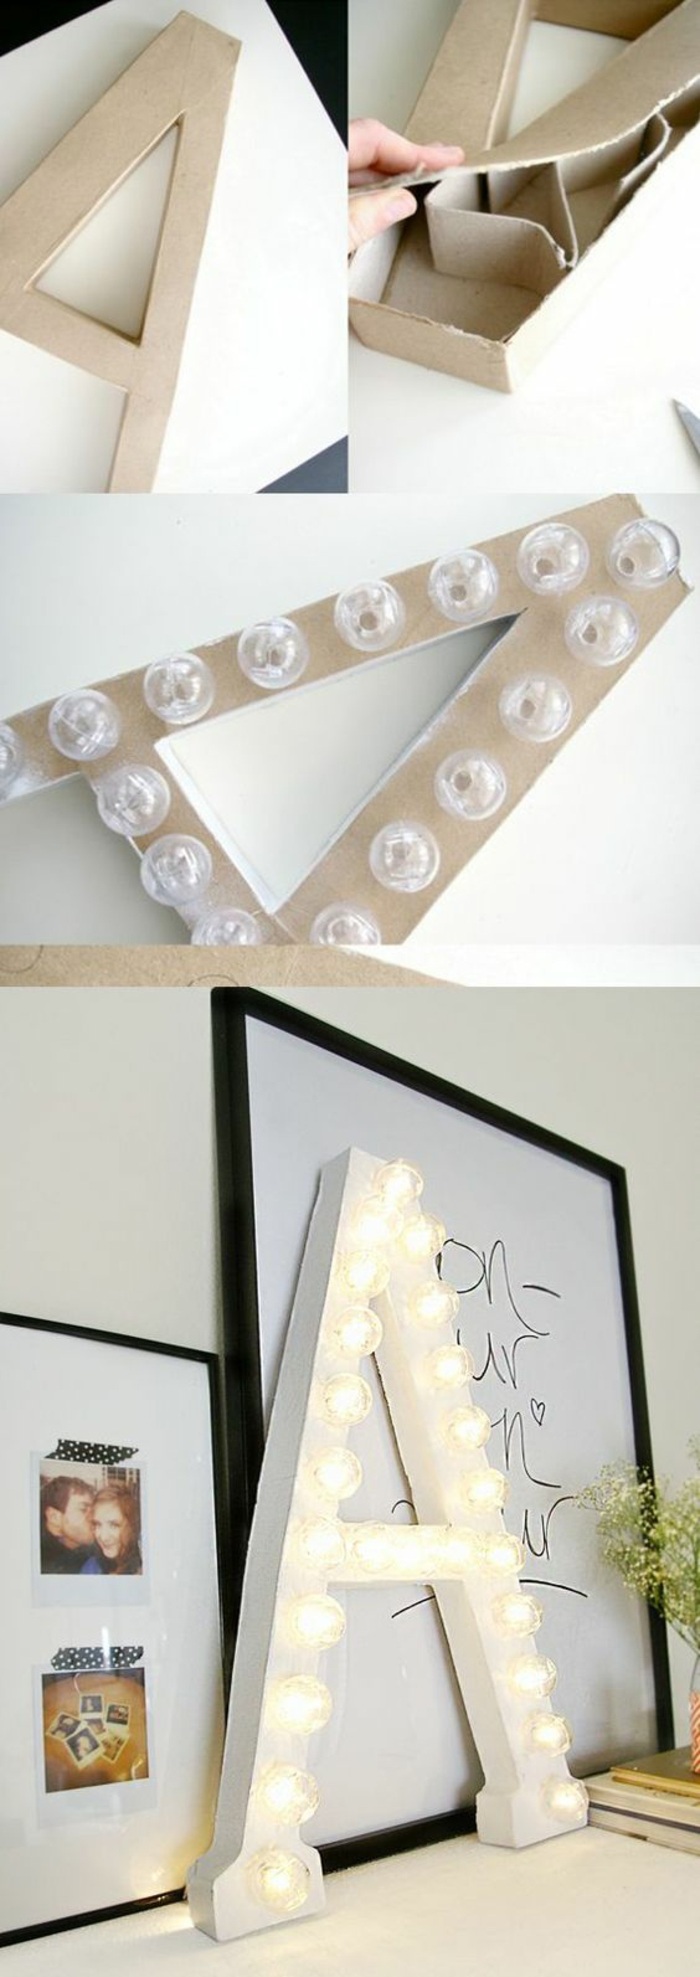 84 Cool Craft Ideas To Make Yourself